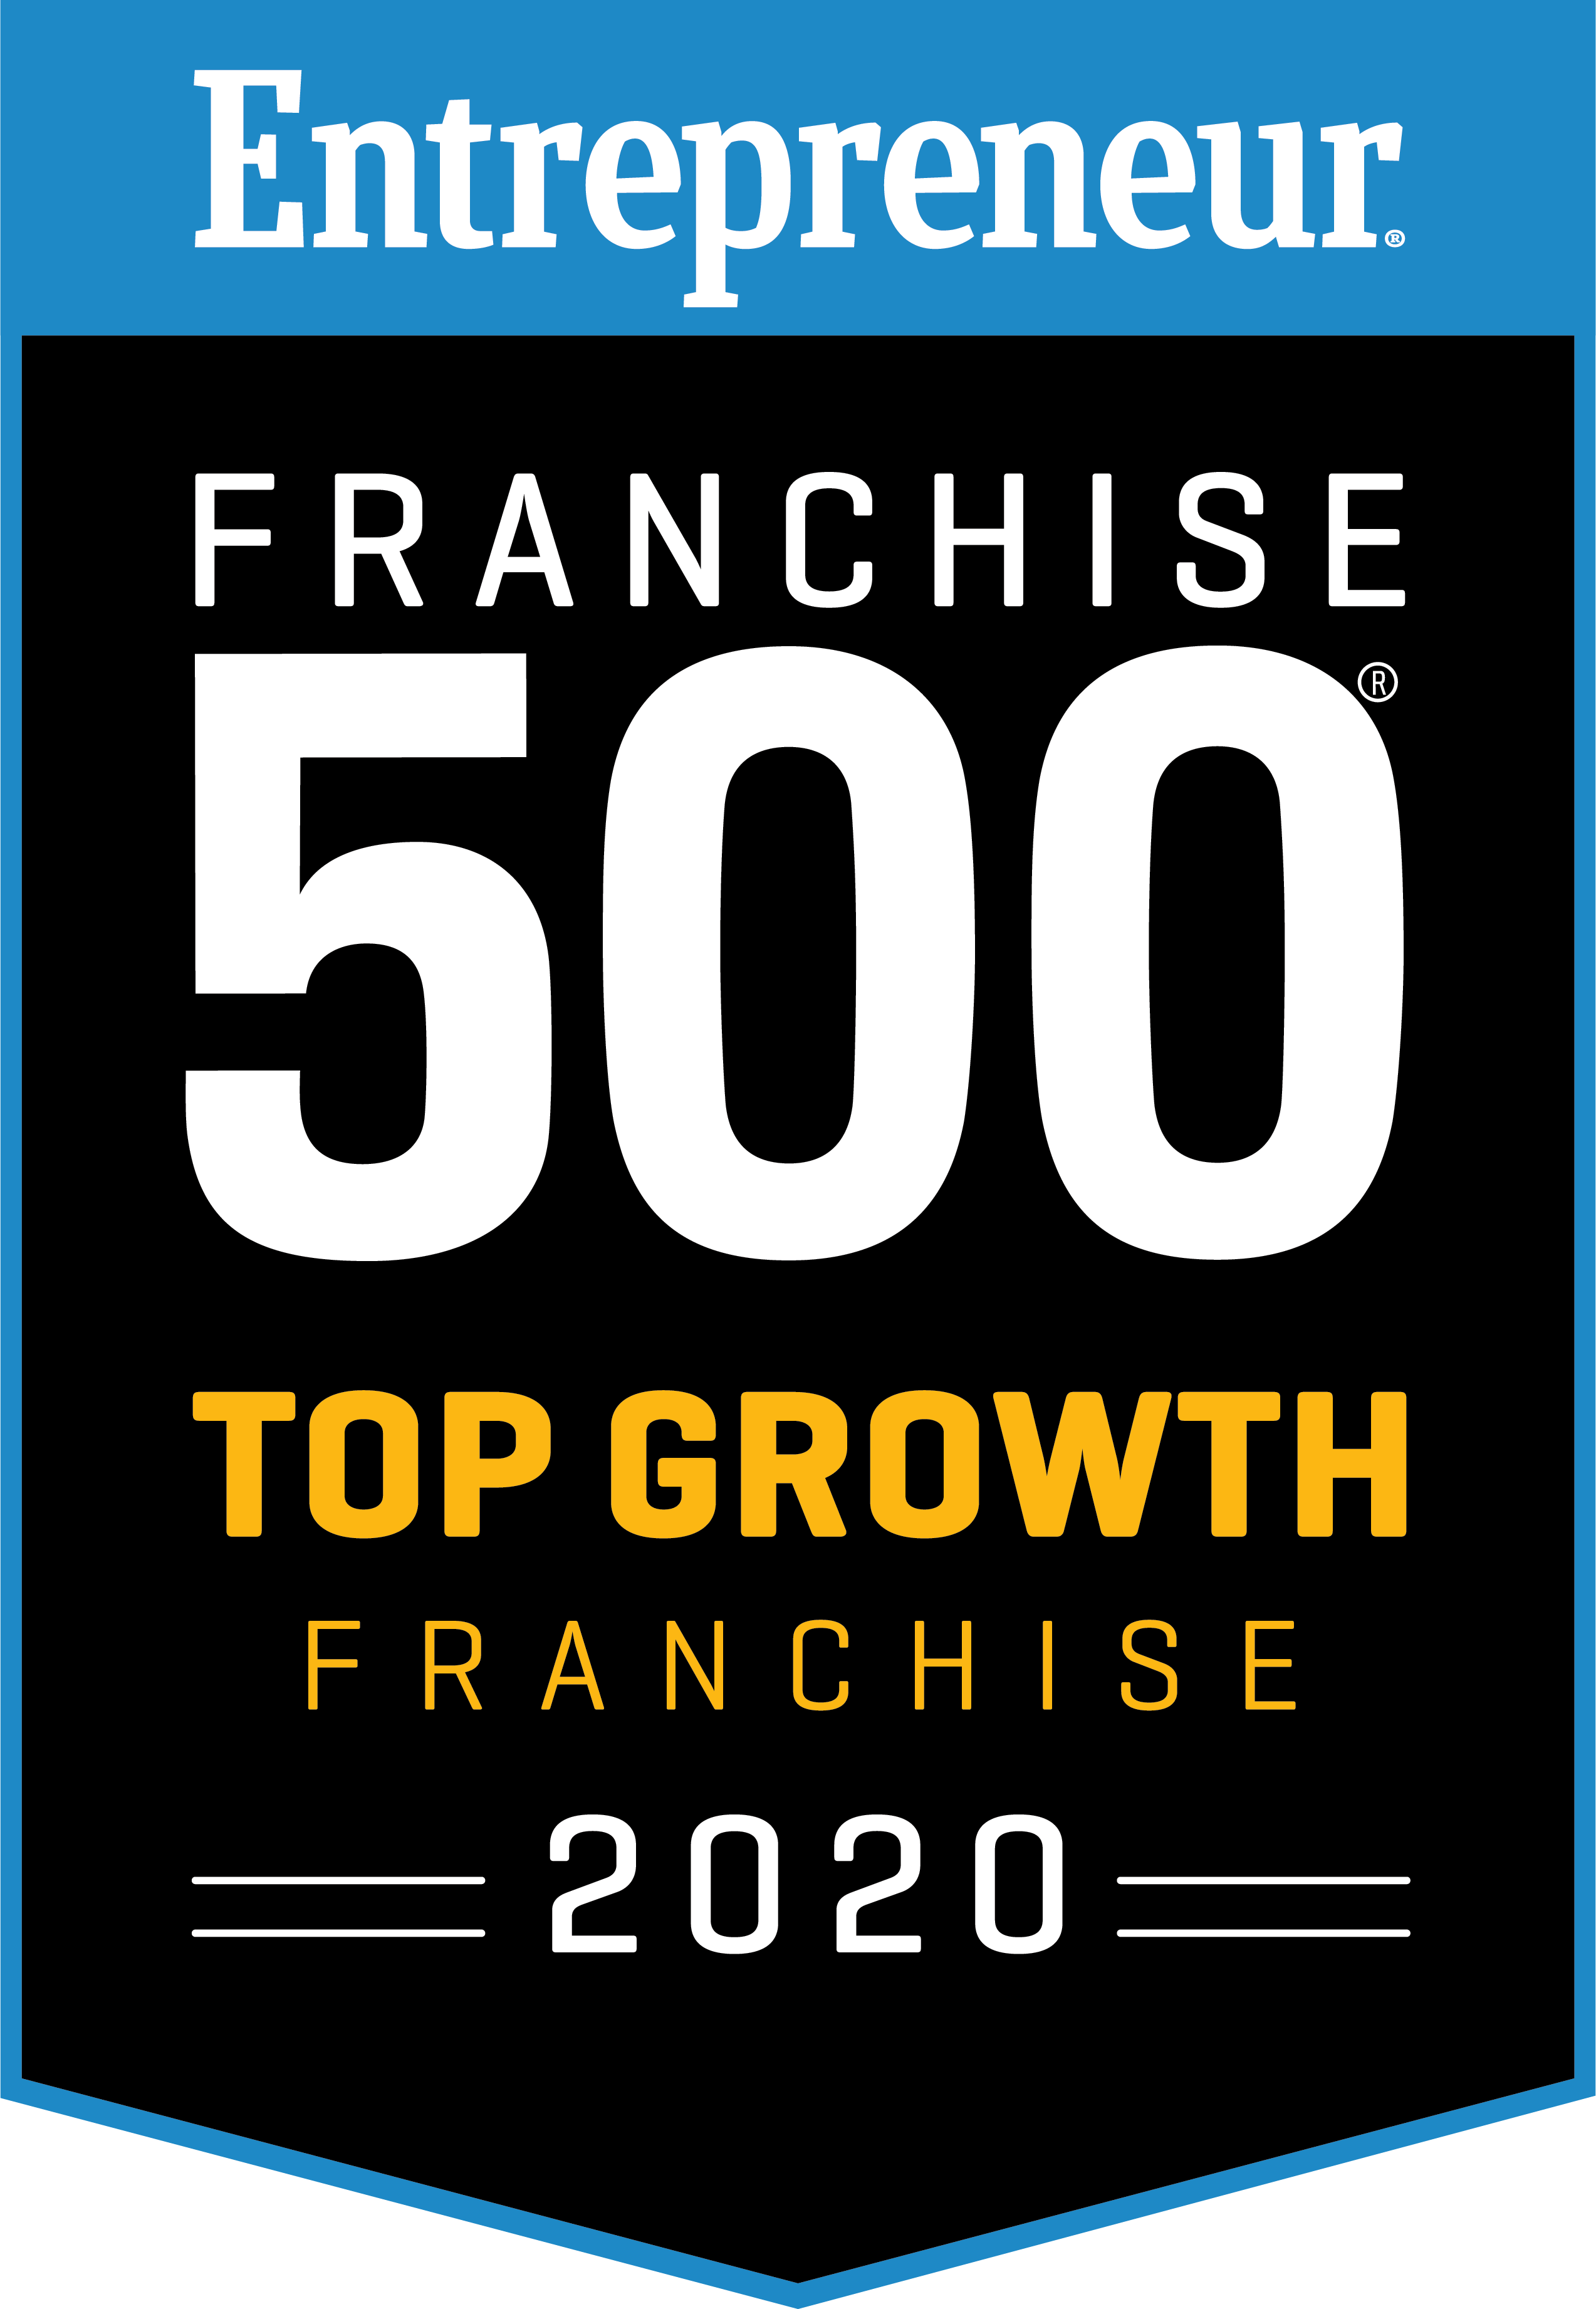 Top growth franchise